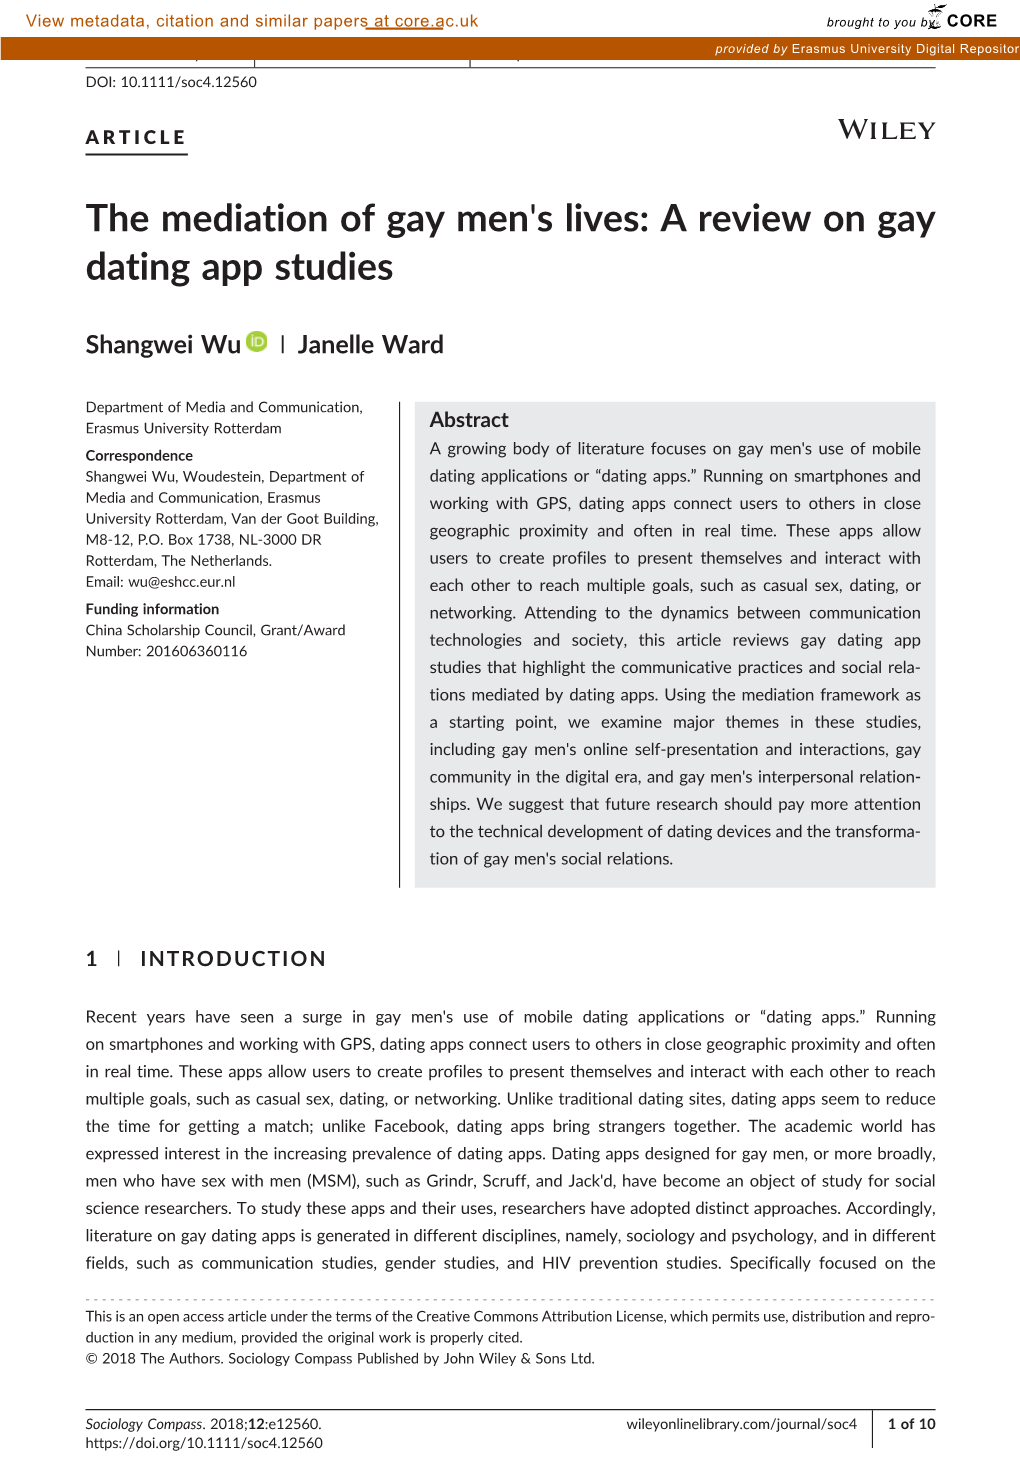 A Review on Gay Dating App Studies